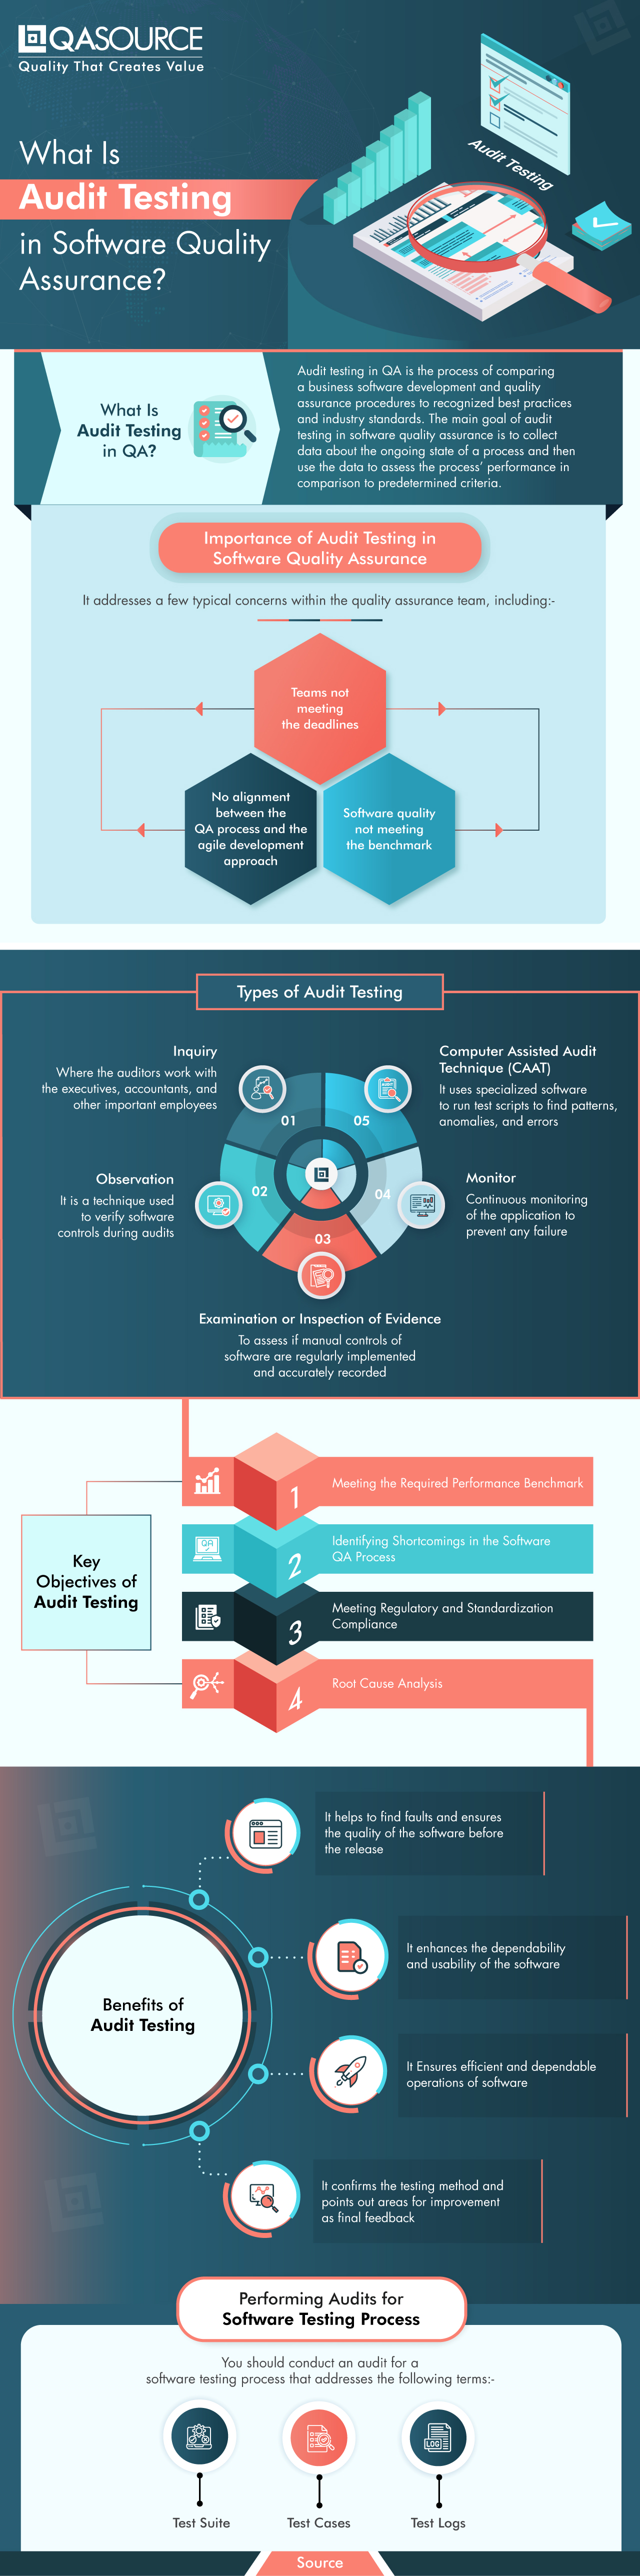 What Is Audit Testing in Software Quality Assurance? (Infographic)